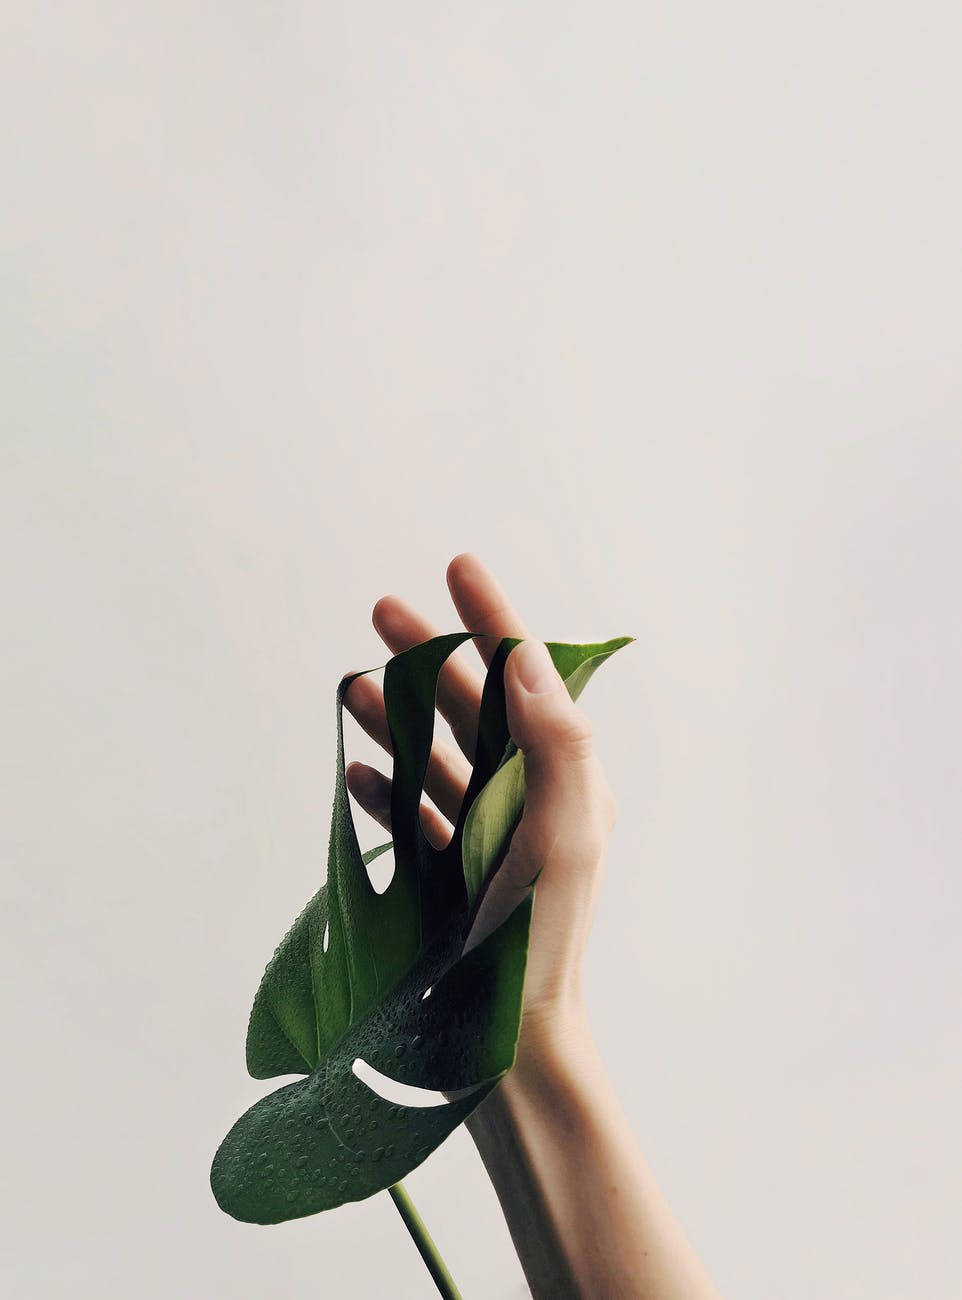 photo of person holding green leaf